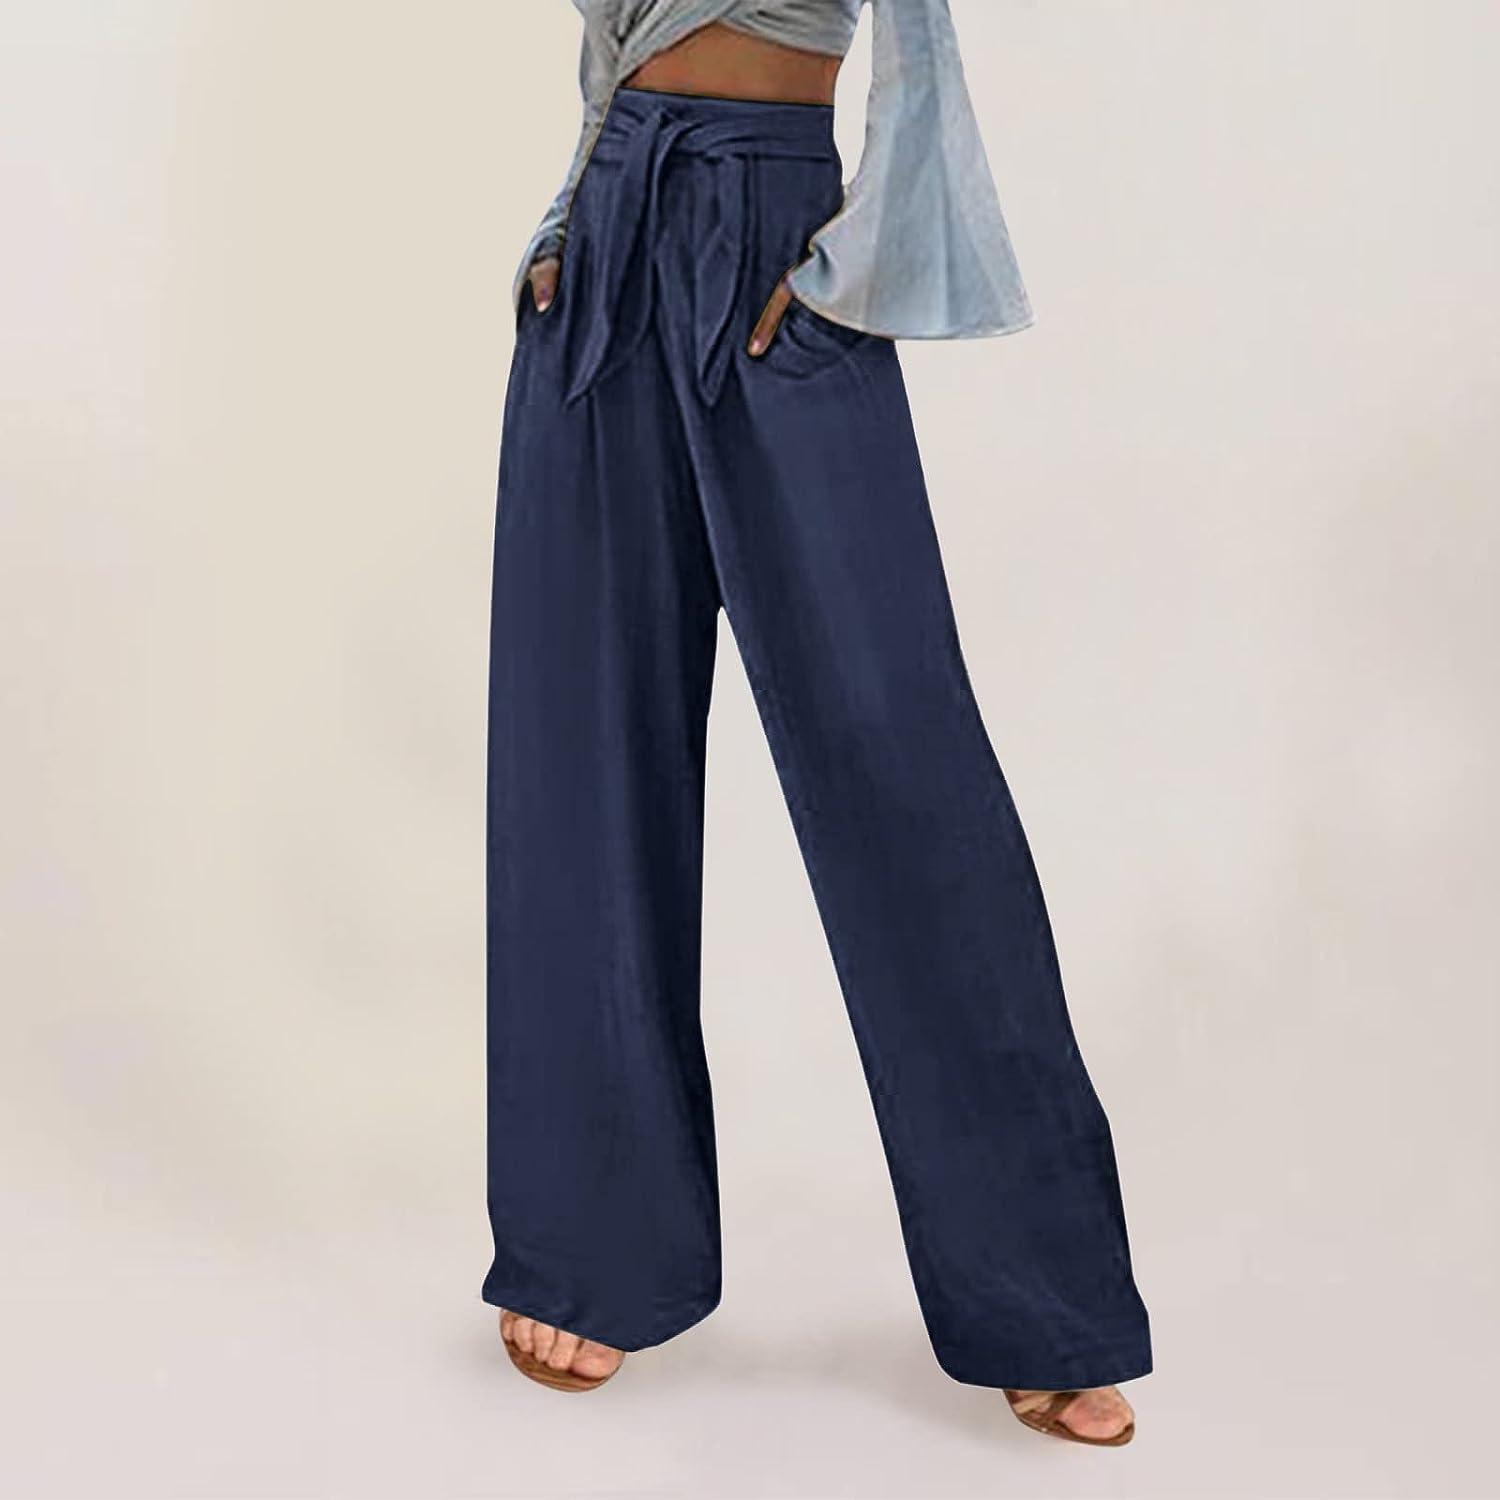 Women's Casual Wide Leg Pants High Waisted Loose Flowy Beach Palazzo Comfy  Cotton Linen Lounge Trousers Sweatpants A5 Navy Small